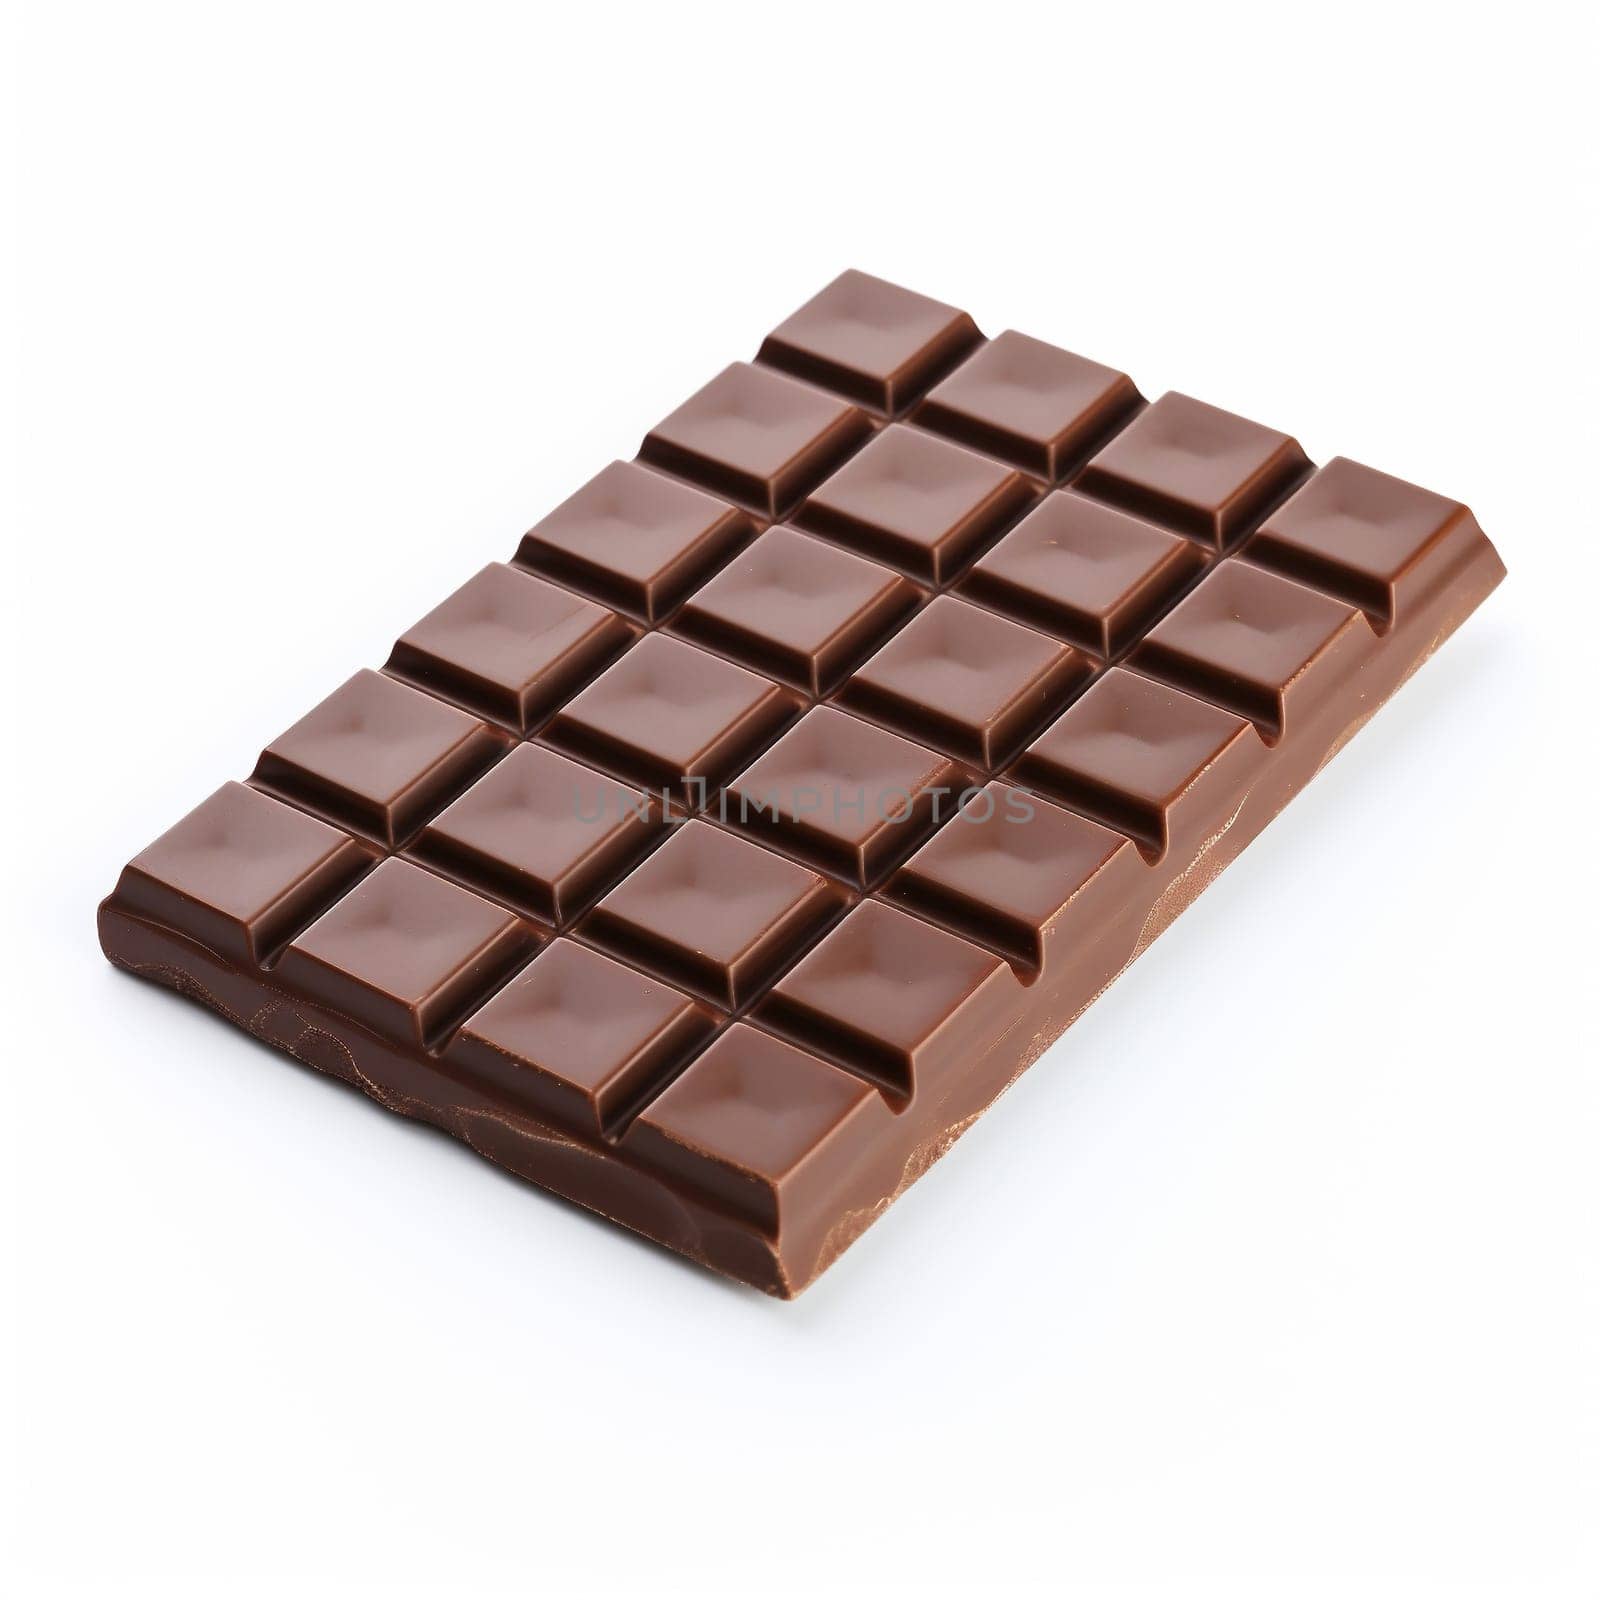 Milk Chocolate Bar Isolated on White Background. Top View.